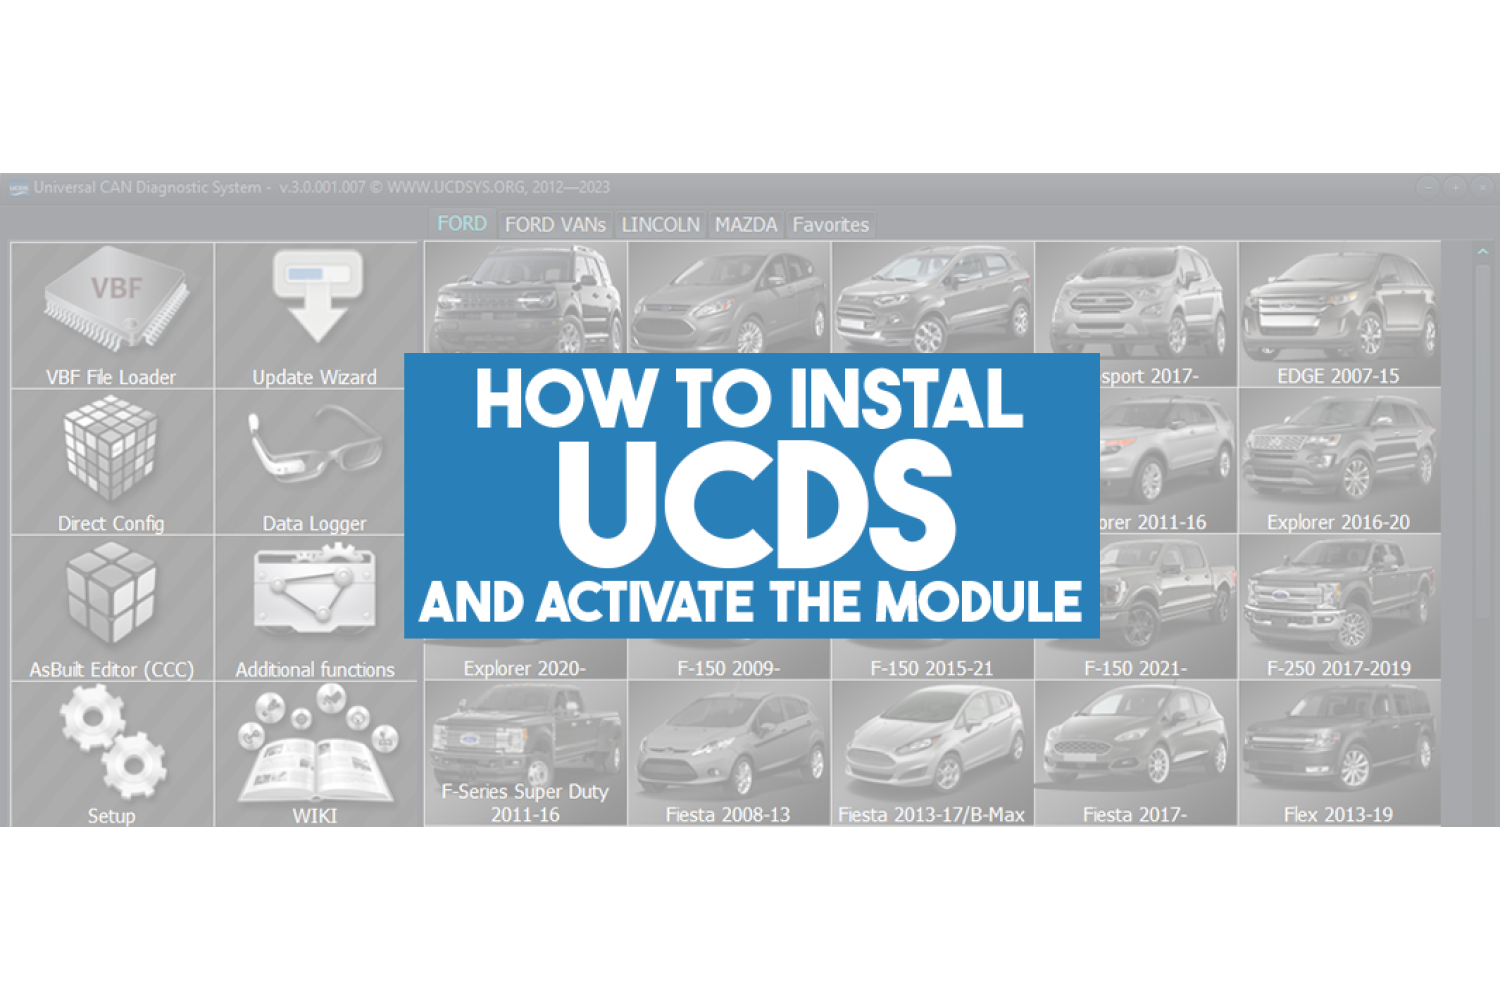 How to install UCDS and activate module